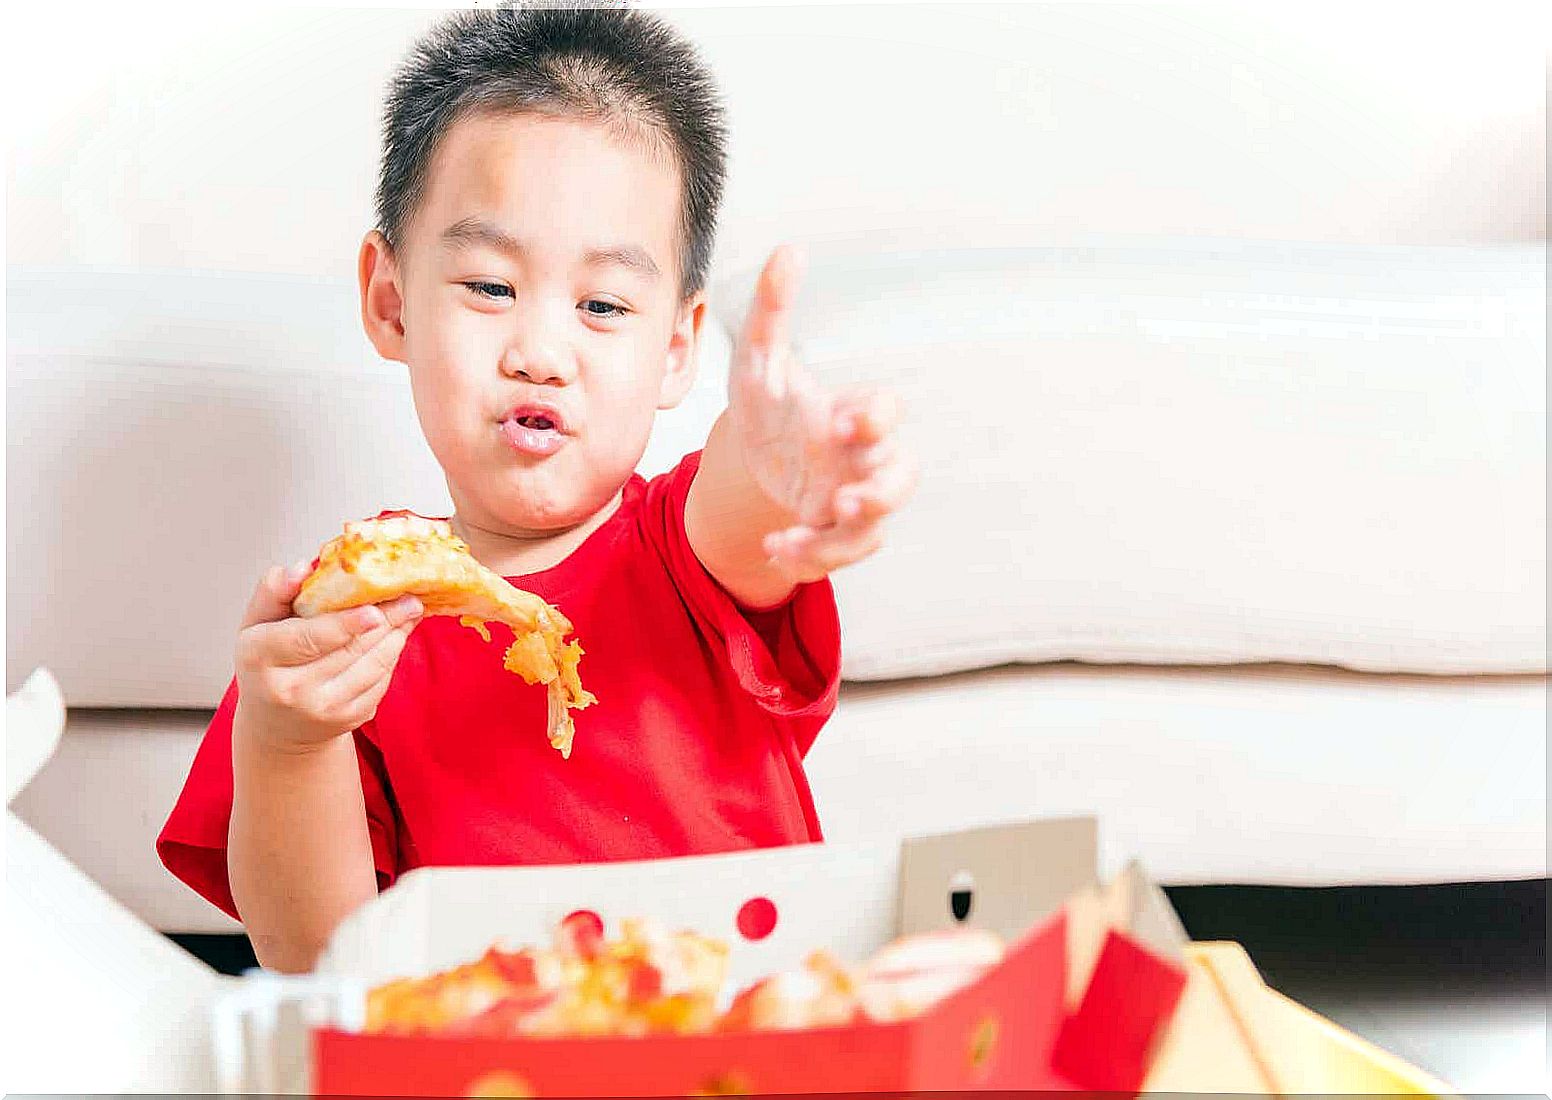 A child eating junk food.